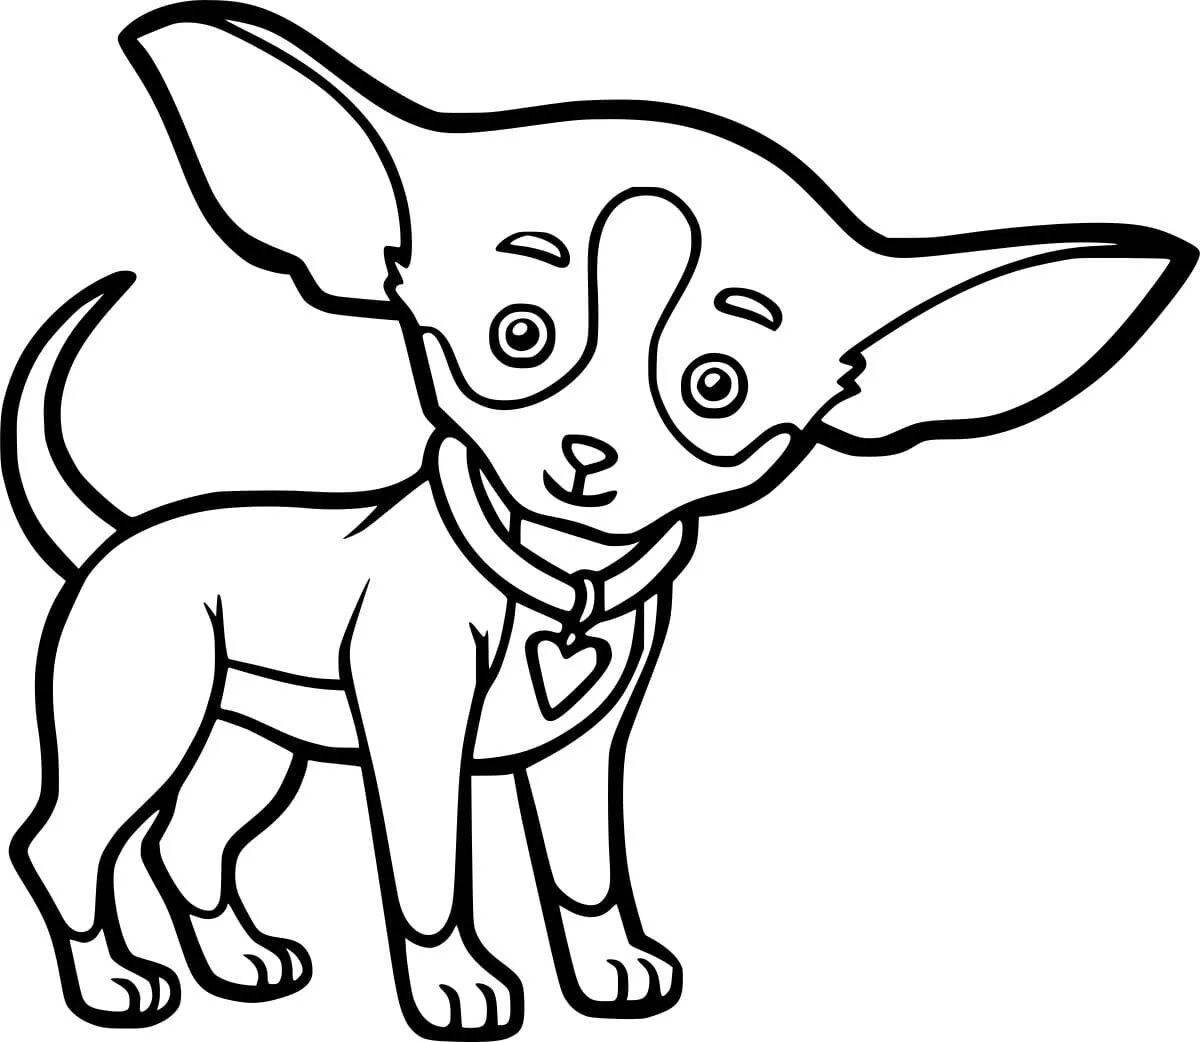 Coloring page energetic chihuahua dog